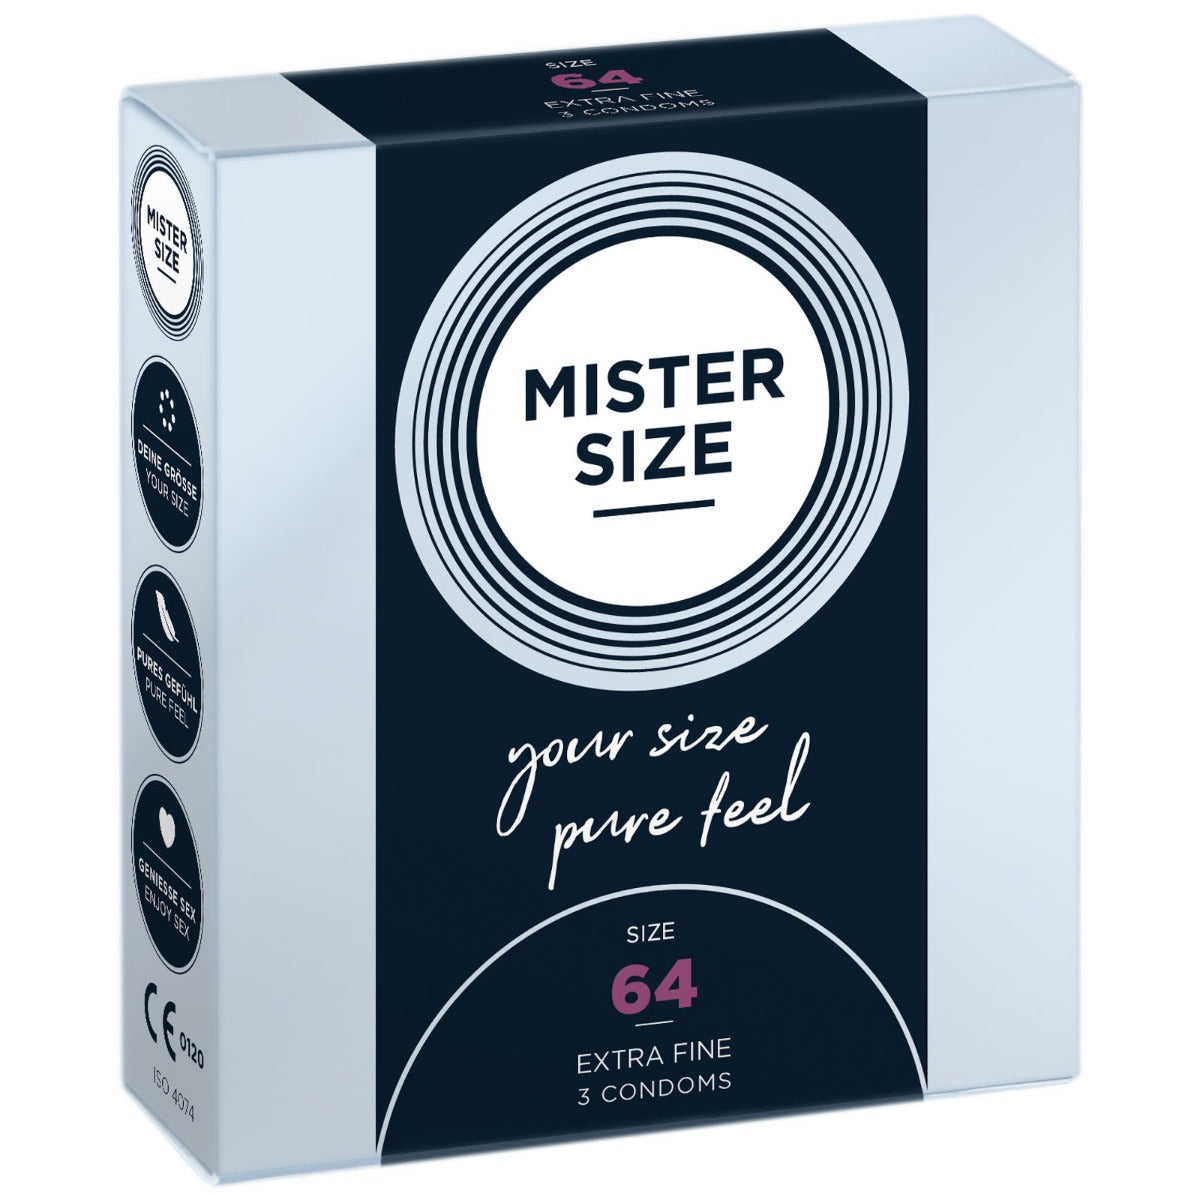 MISTER SIZE | pure feel Condoms - Size 64 mm (3 pack)